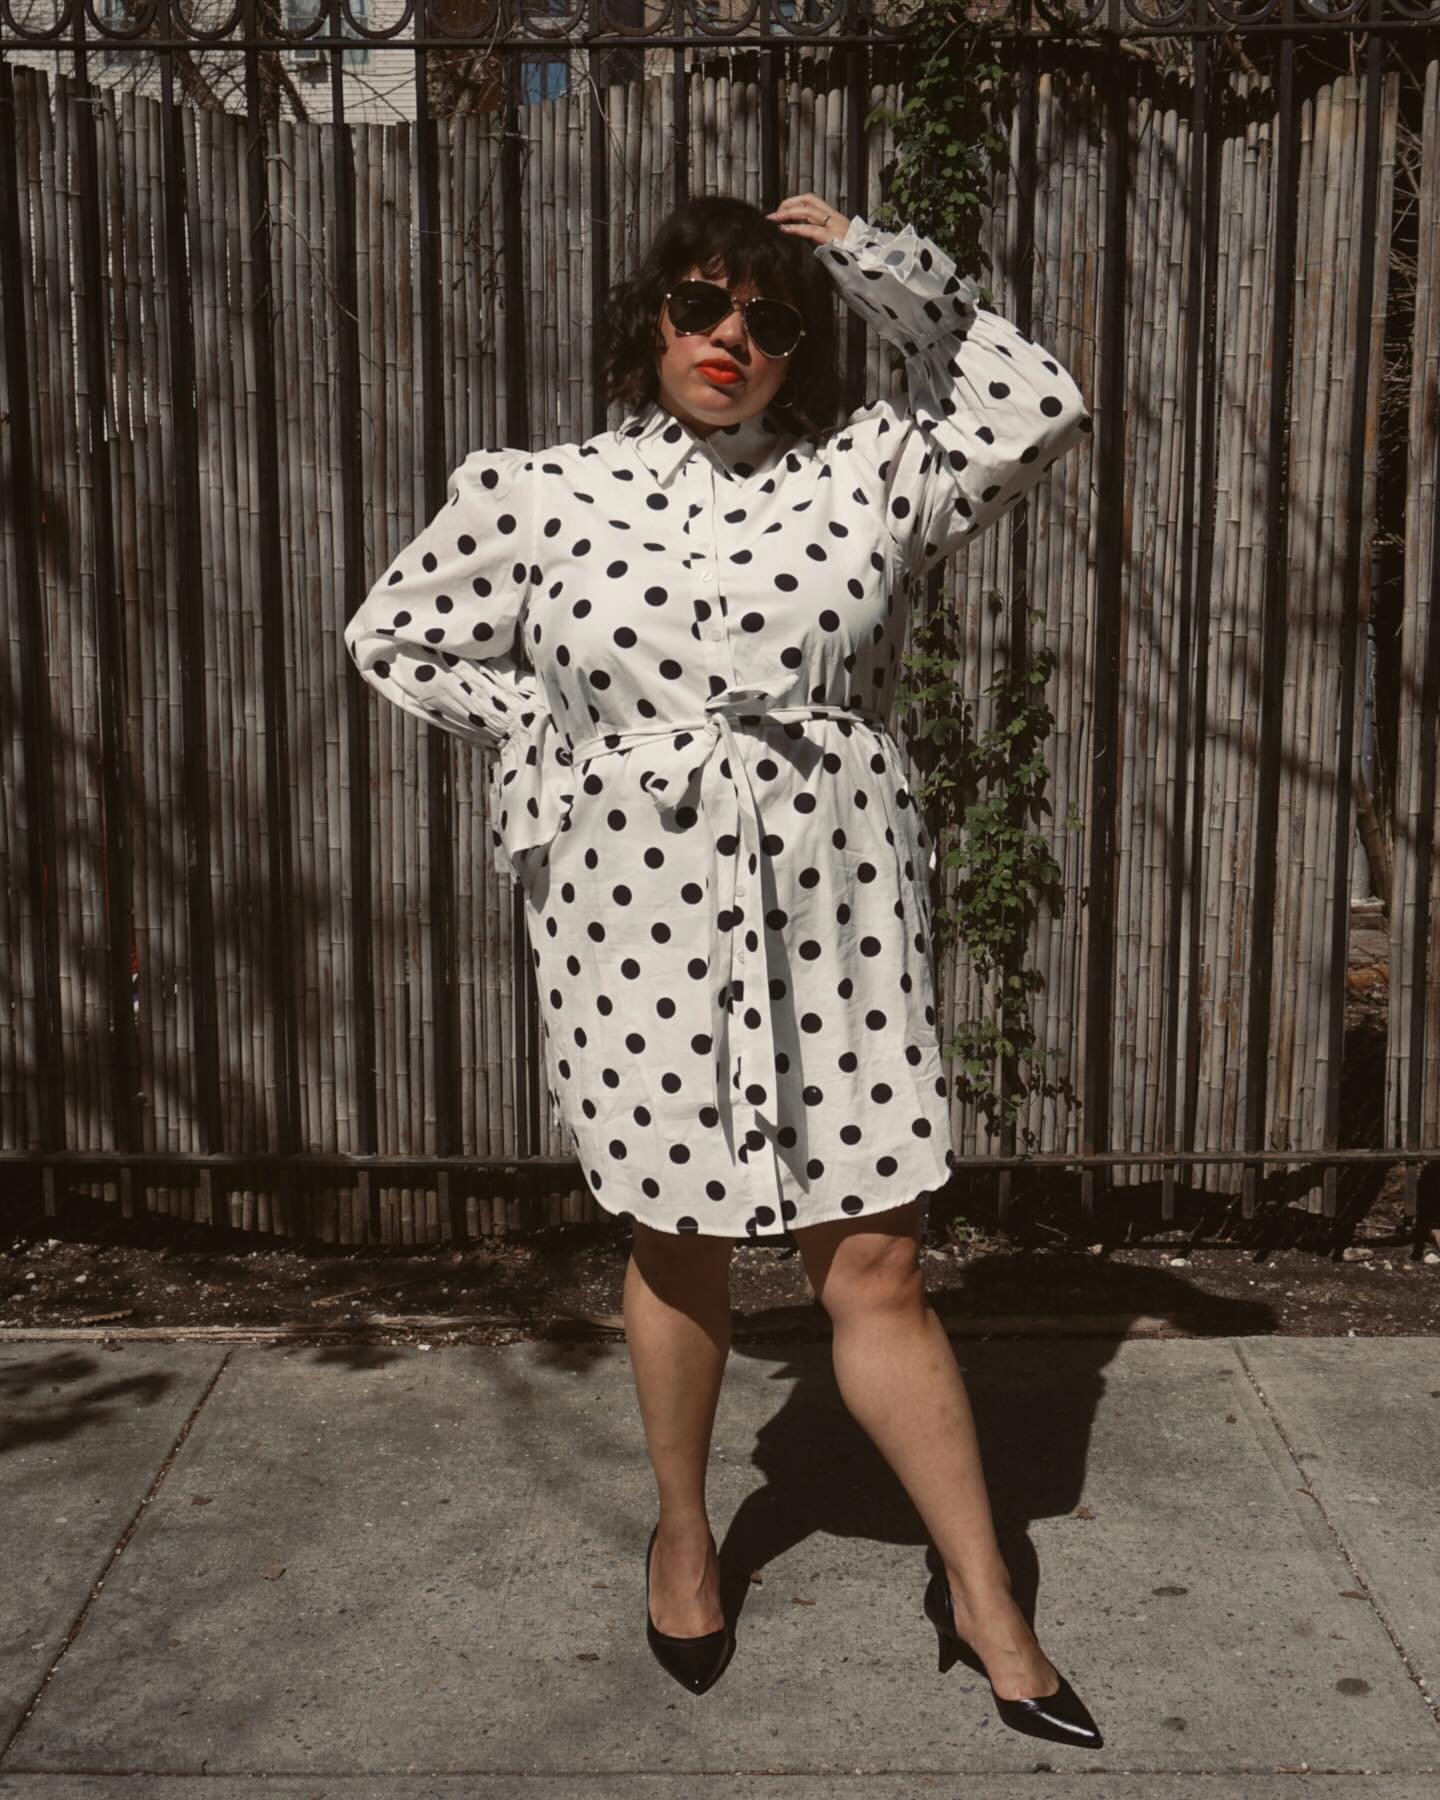 Polka Dot Lady | ⚪⚫⚪⚫

Guys &amp; Dolls it's hot outside today. I'm not prepared for that at all. I'm still in full spring-style swing. 82* today. That's when the real New Yorker comes out of me. How many times could I say &ldquo;Oh Nahhhh&rdquo; unt